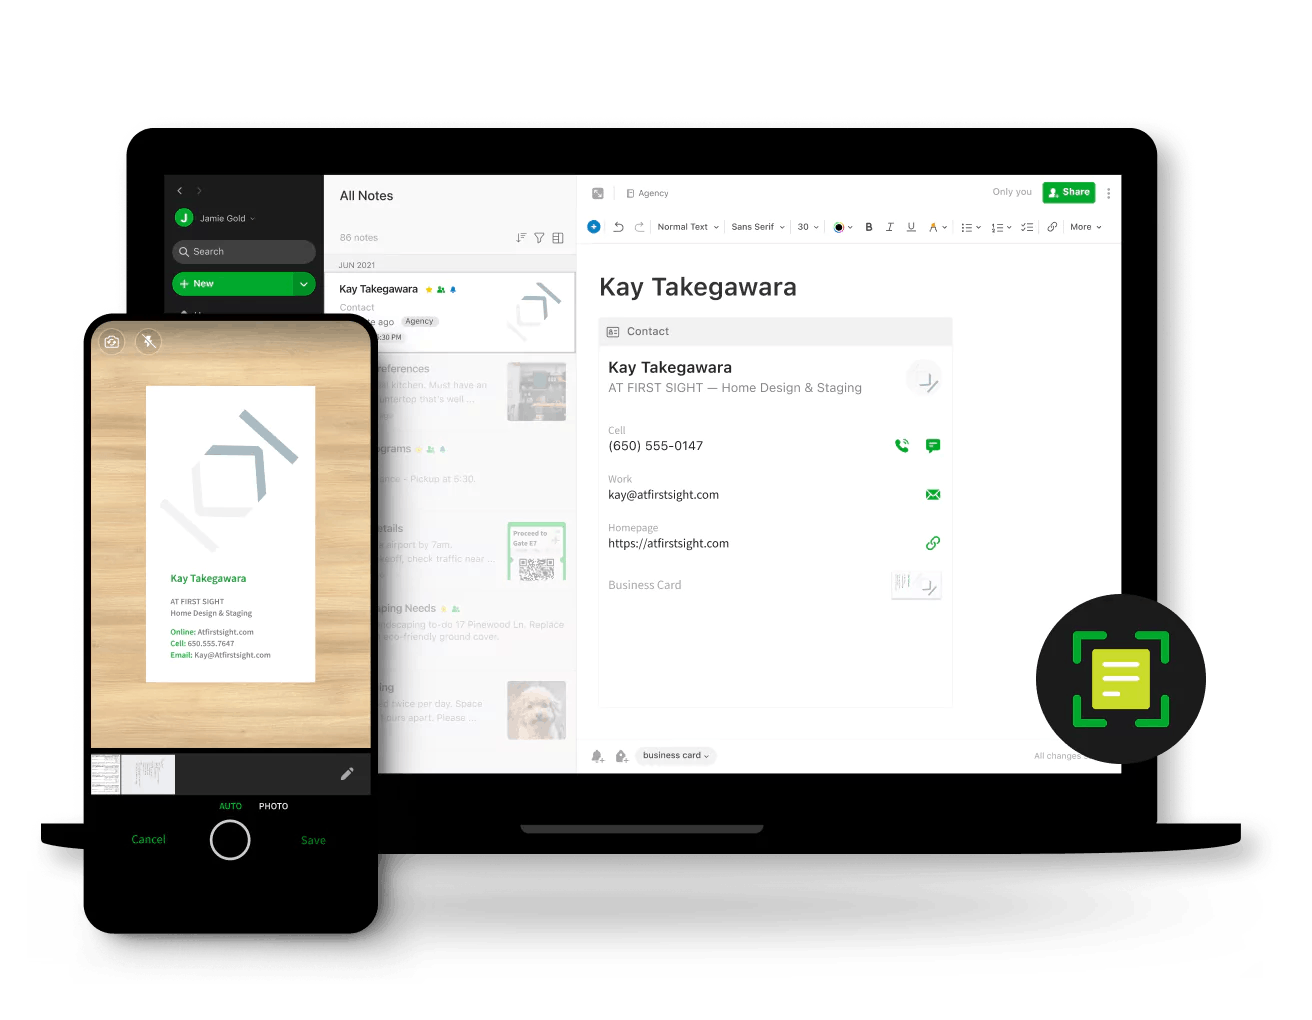 Document scanning feature of Evernote